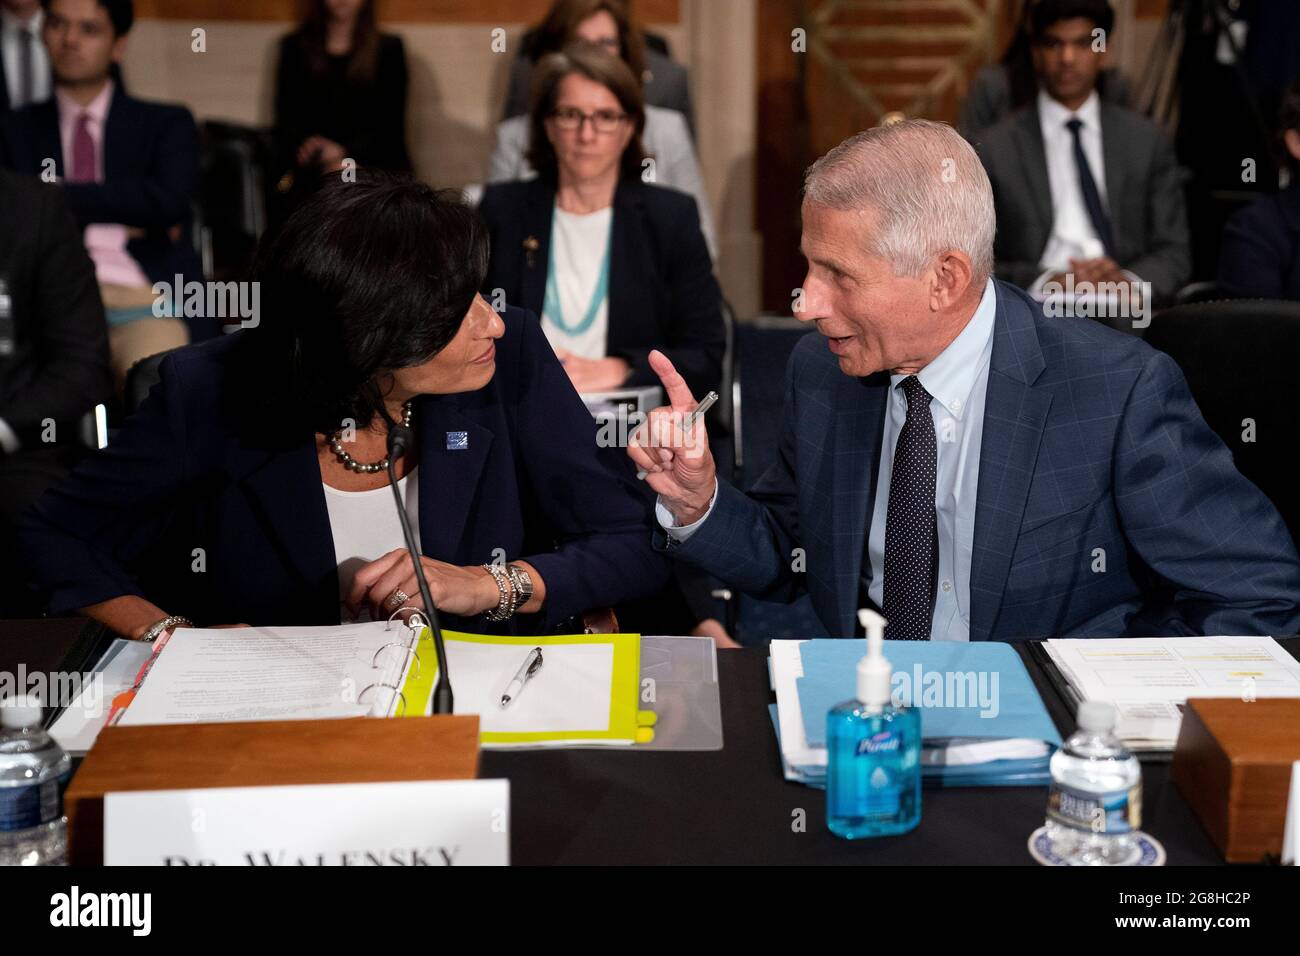 Washington DC, USA. 20th July, 2021. Anthony Fauci (R), director of the U.S. National Institute of Allergy and Infectious Diseases, speaks to Rochelle Walensky, director of the U.S. Centers for Disease Control and Prevention, prior to a Senate Health, Education, Labor and Pensions Committee hearing titled 'The Path Forward: A Federal Perspective on the COVID-19 Response' in Washington, DC, the United States, on July 20, 2021. Anthony Fauci has recently said that he believes the natural origins theory of the novel coronavirus is still 'the most likely.' (Stefani Reynolds/Pool via Credit: Xinhua Stock Photo